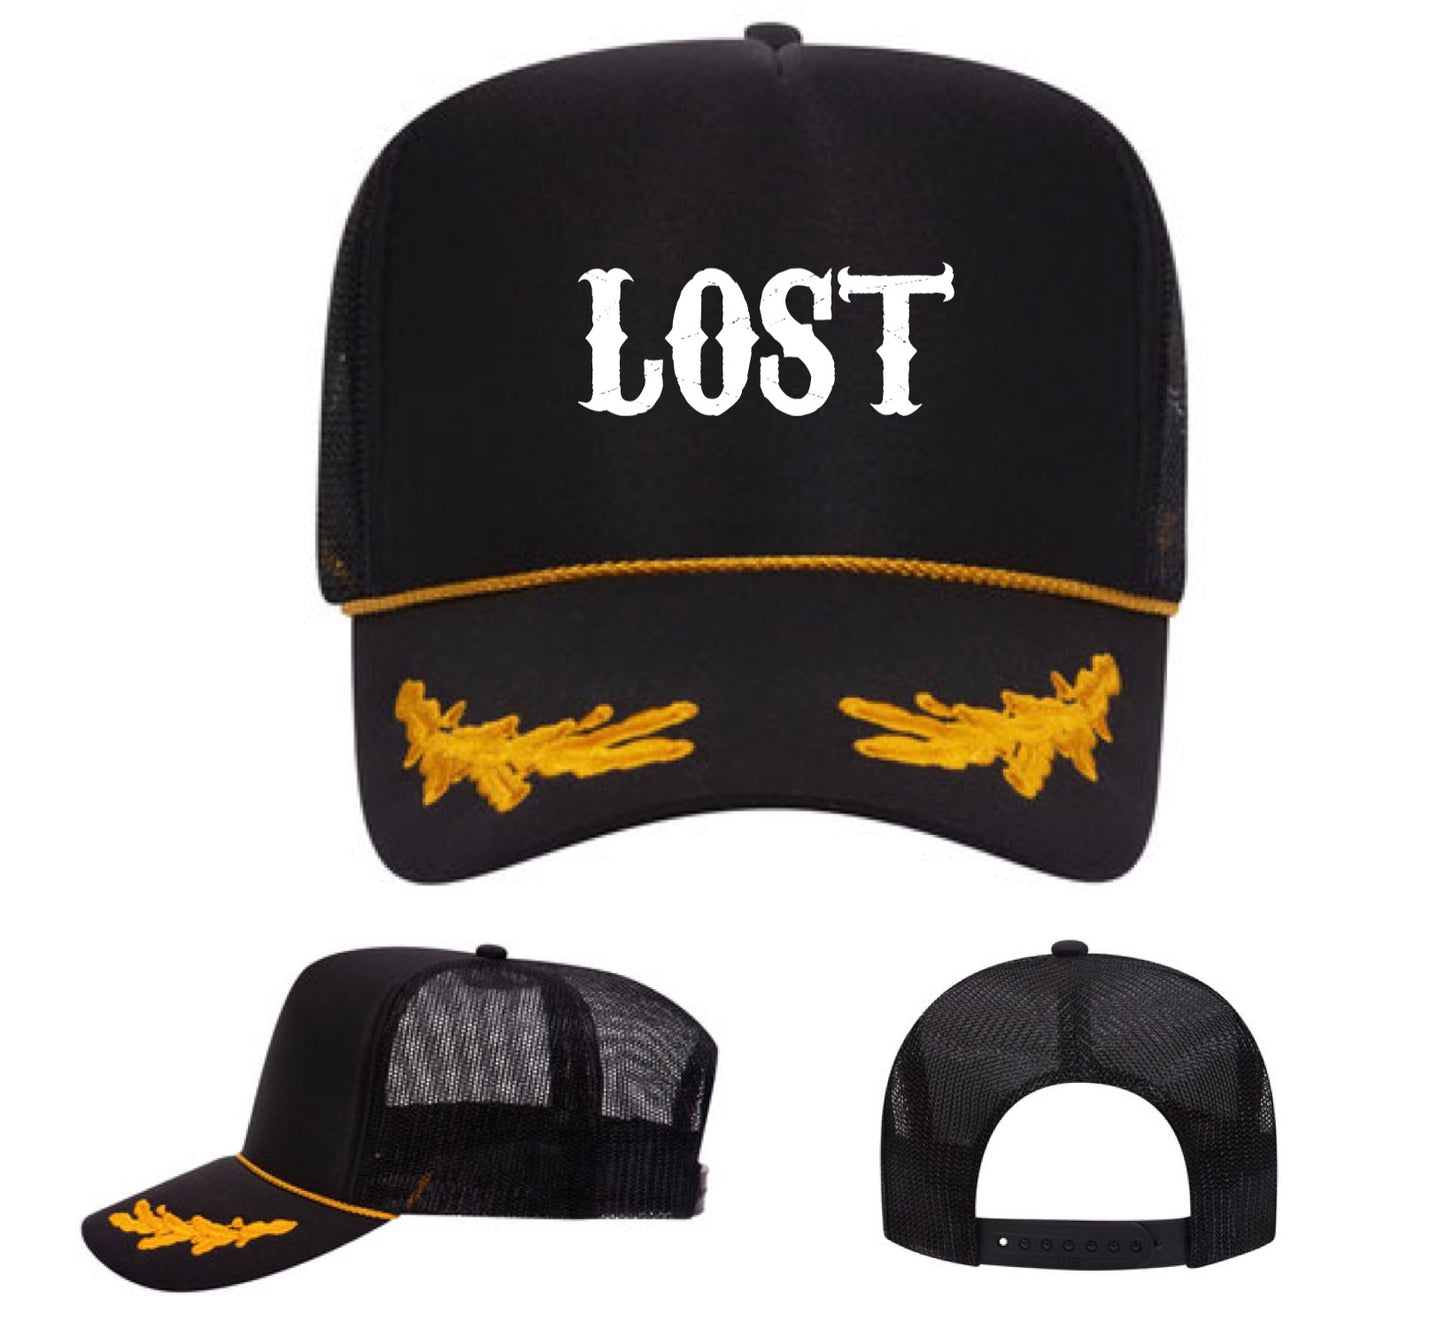 Best Boat Hats Ever (FREE Shipping)